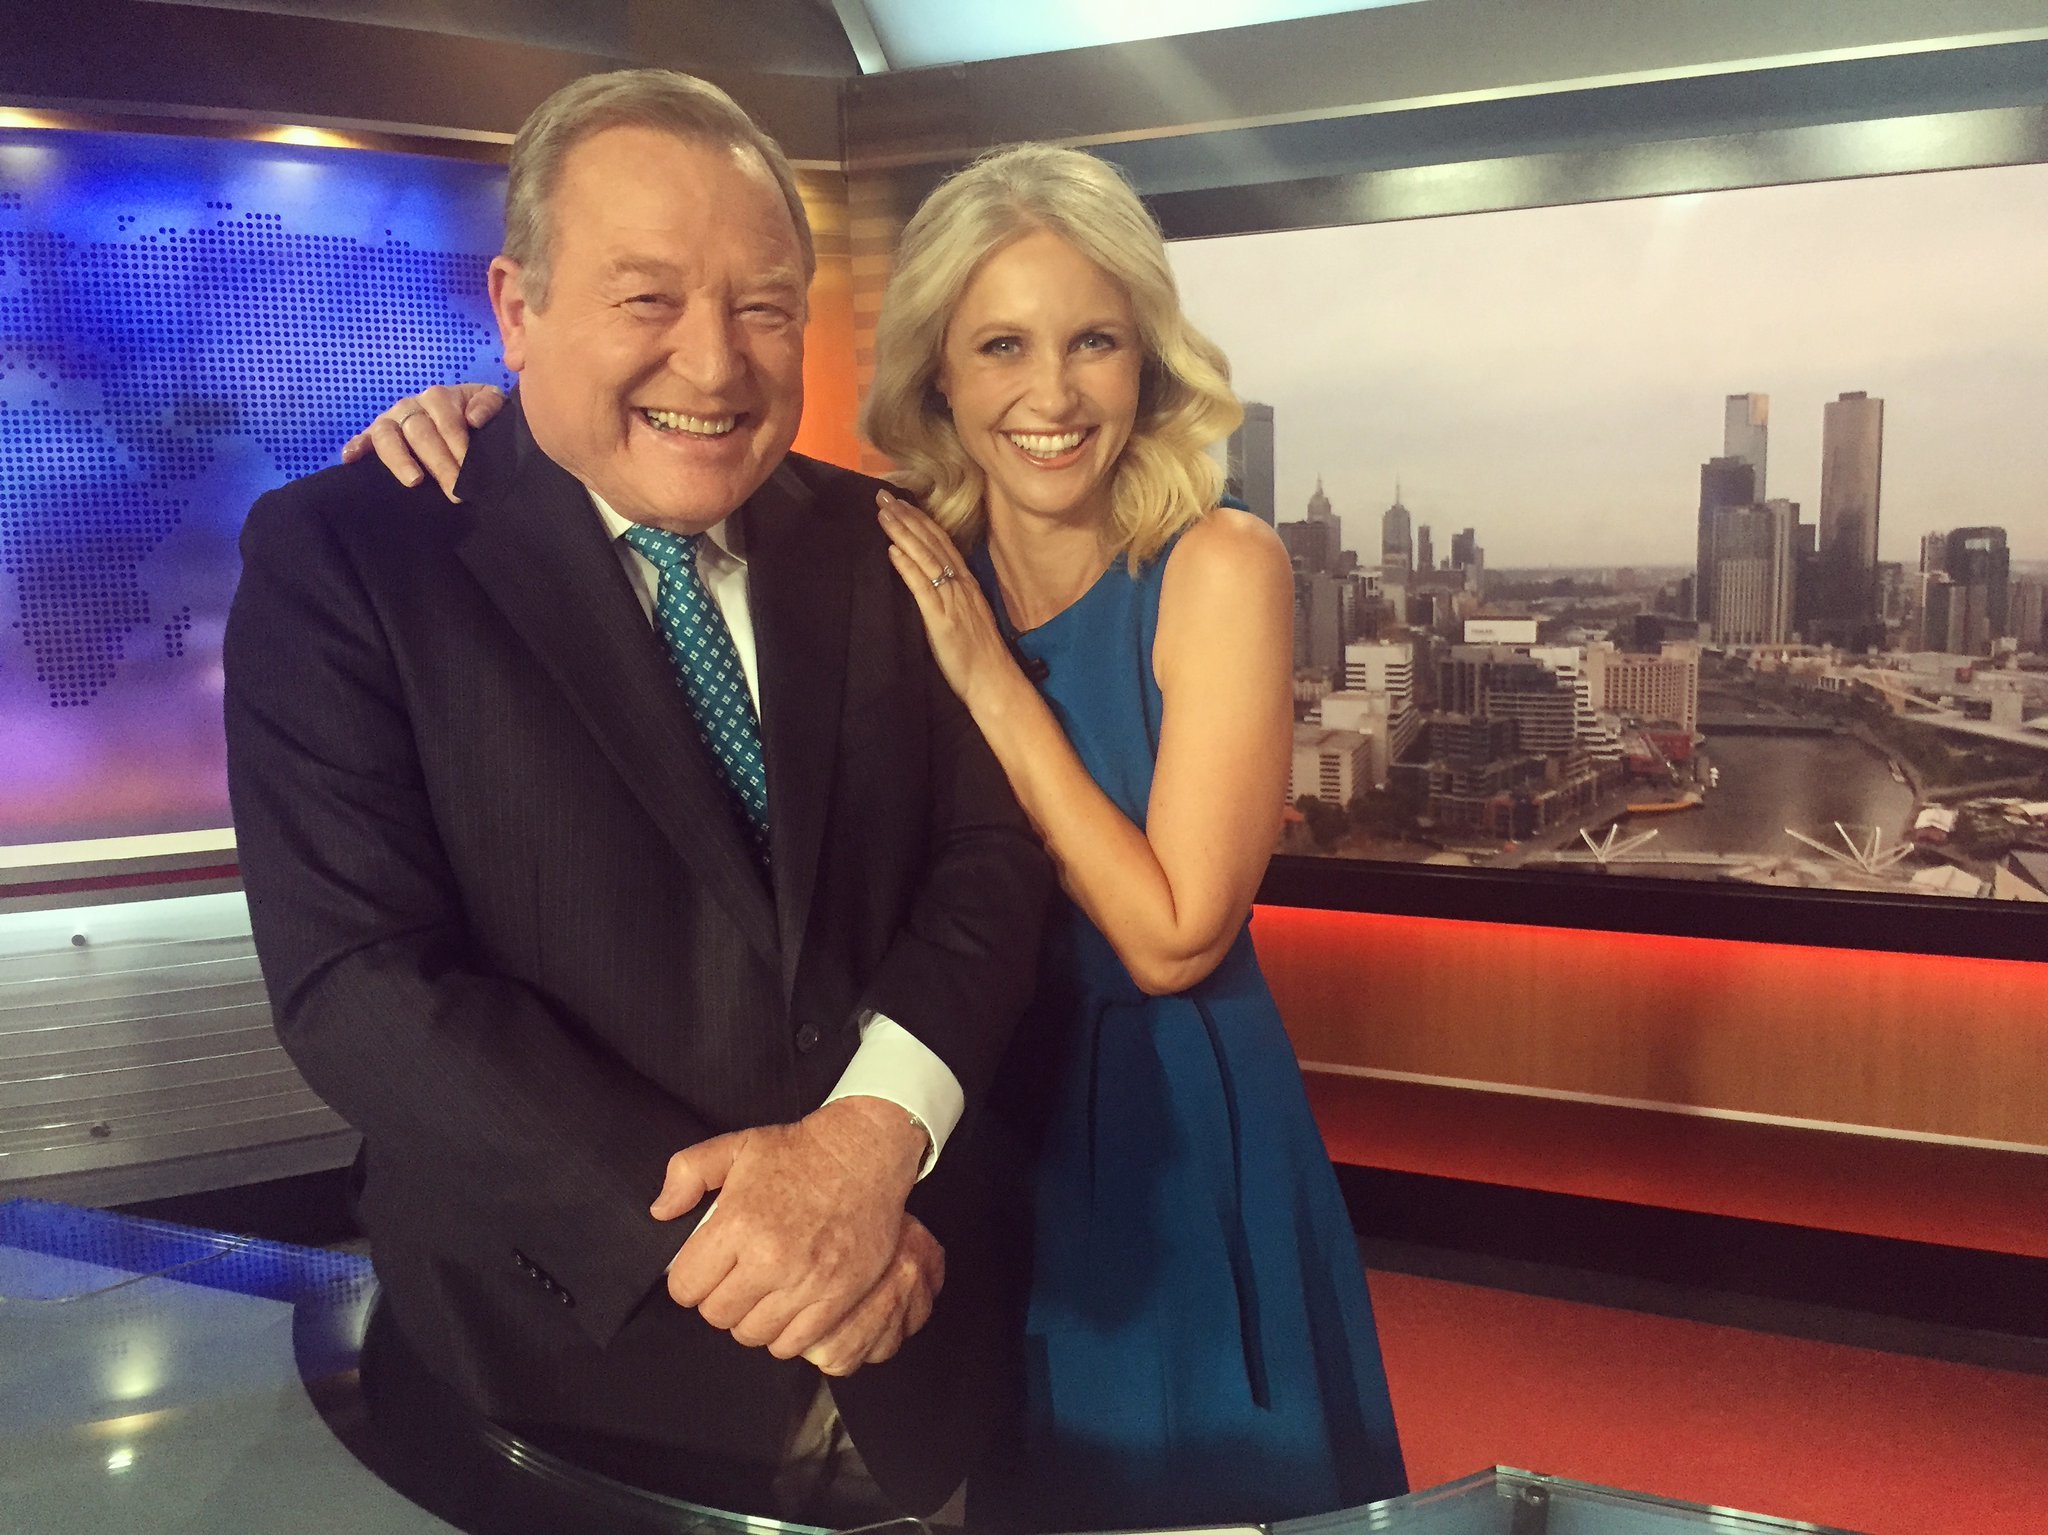 Livinia Nixon also returning tonight for another year at Nine News Melbourn...